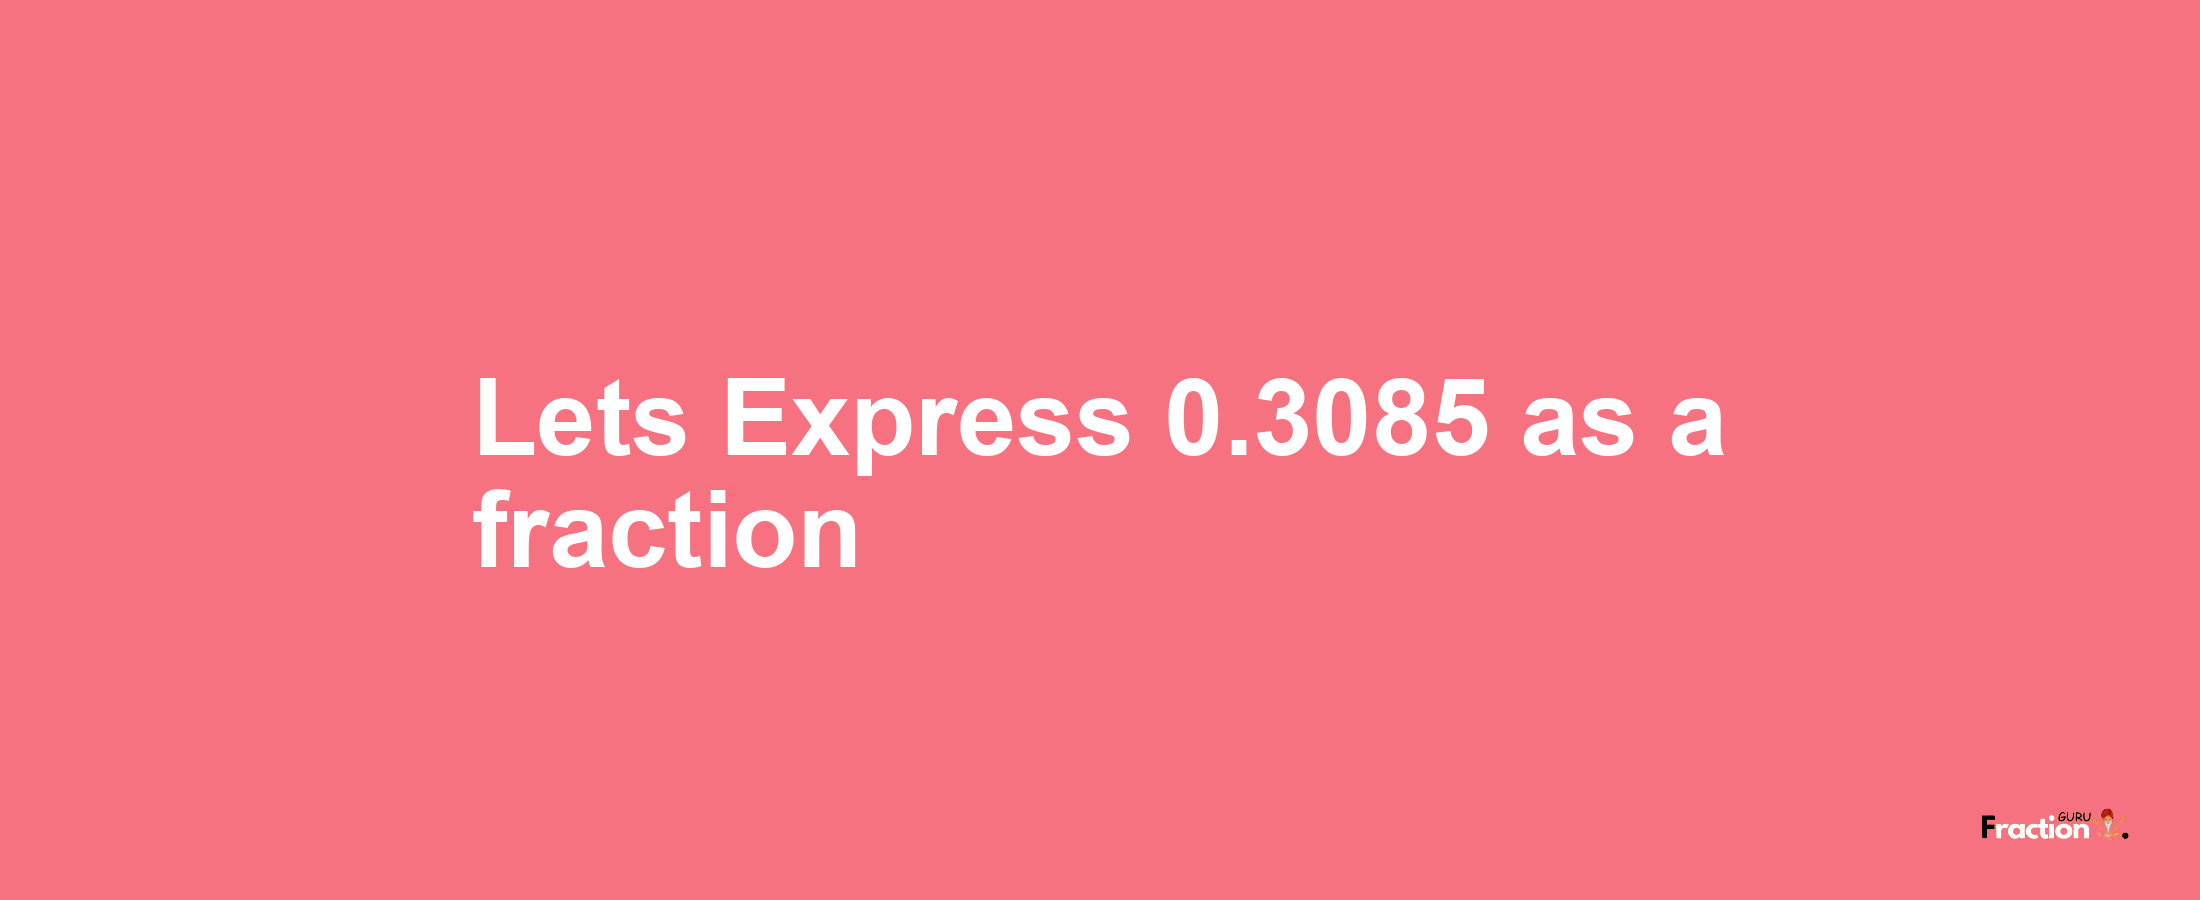 Lets Express 0.3085 as afraction